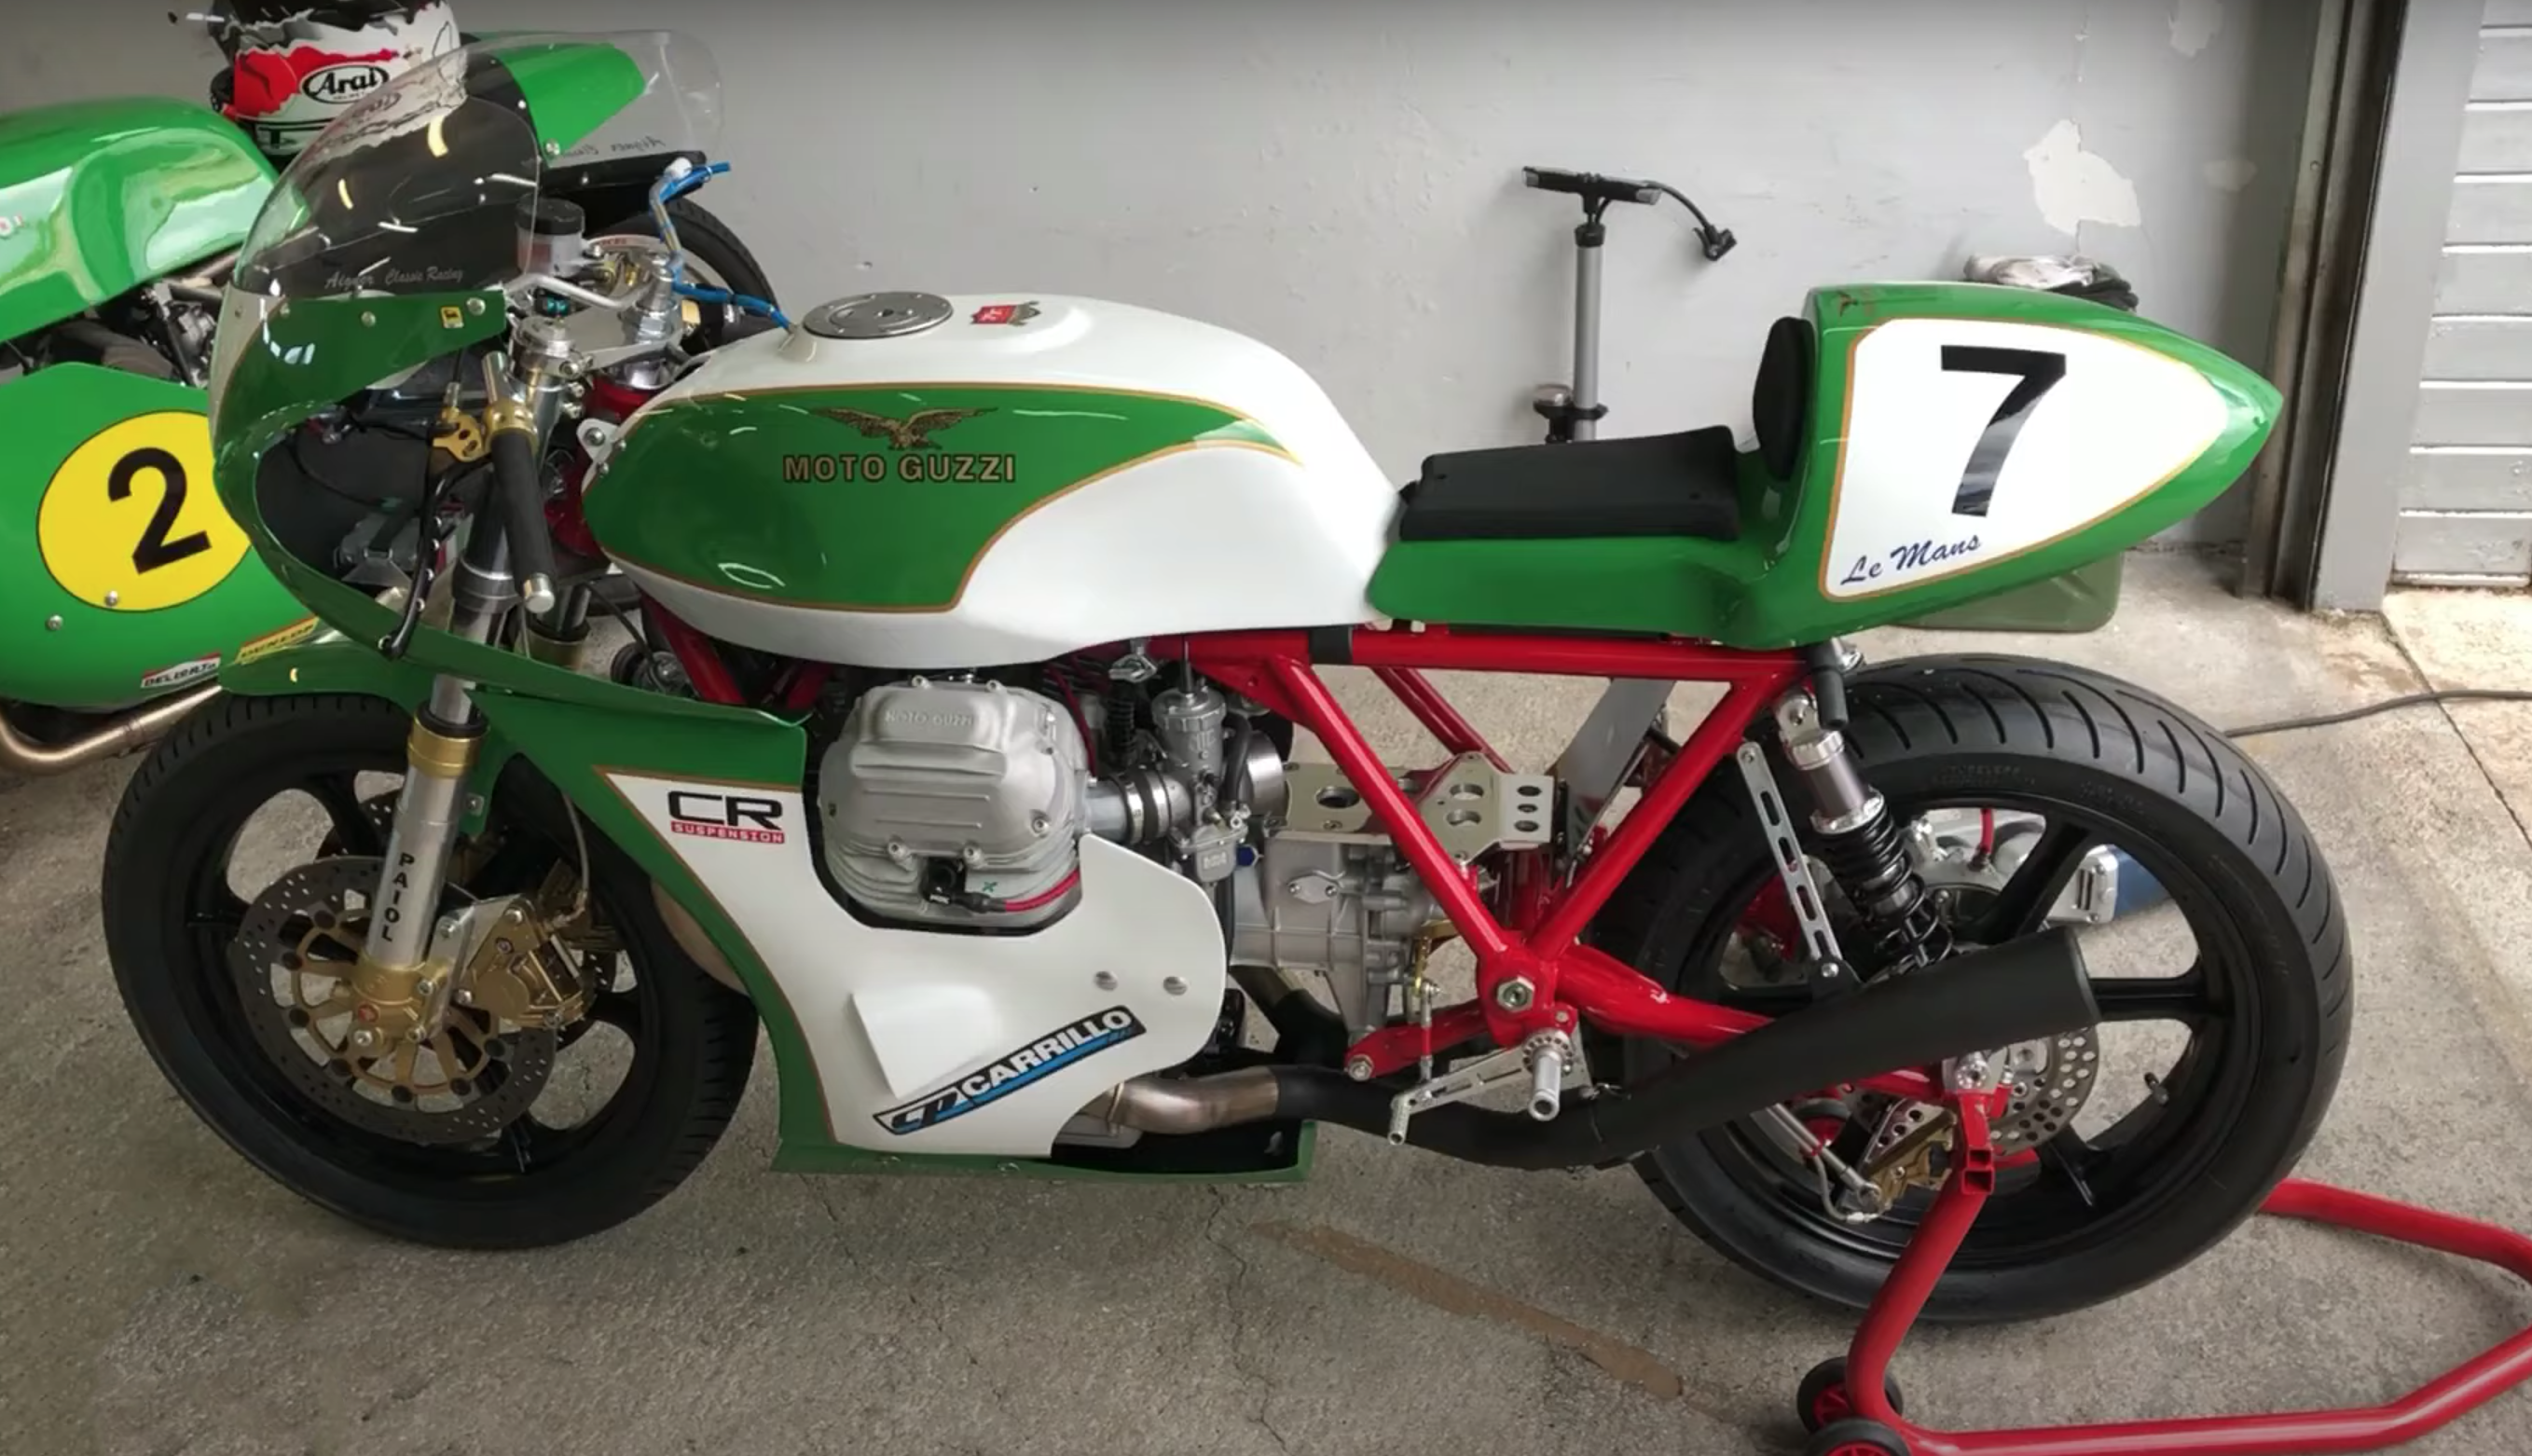 Load video: Moto Guzzi LeMans classic racer ... perfect motorcycle in perfect colours